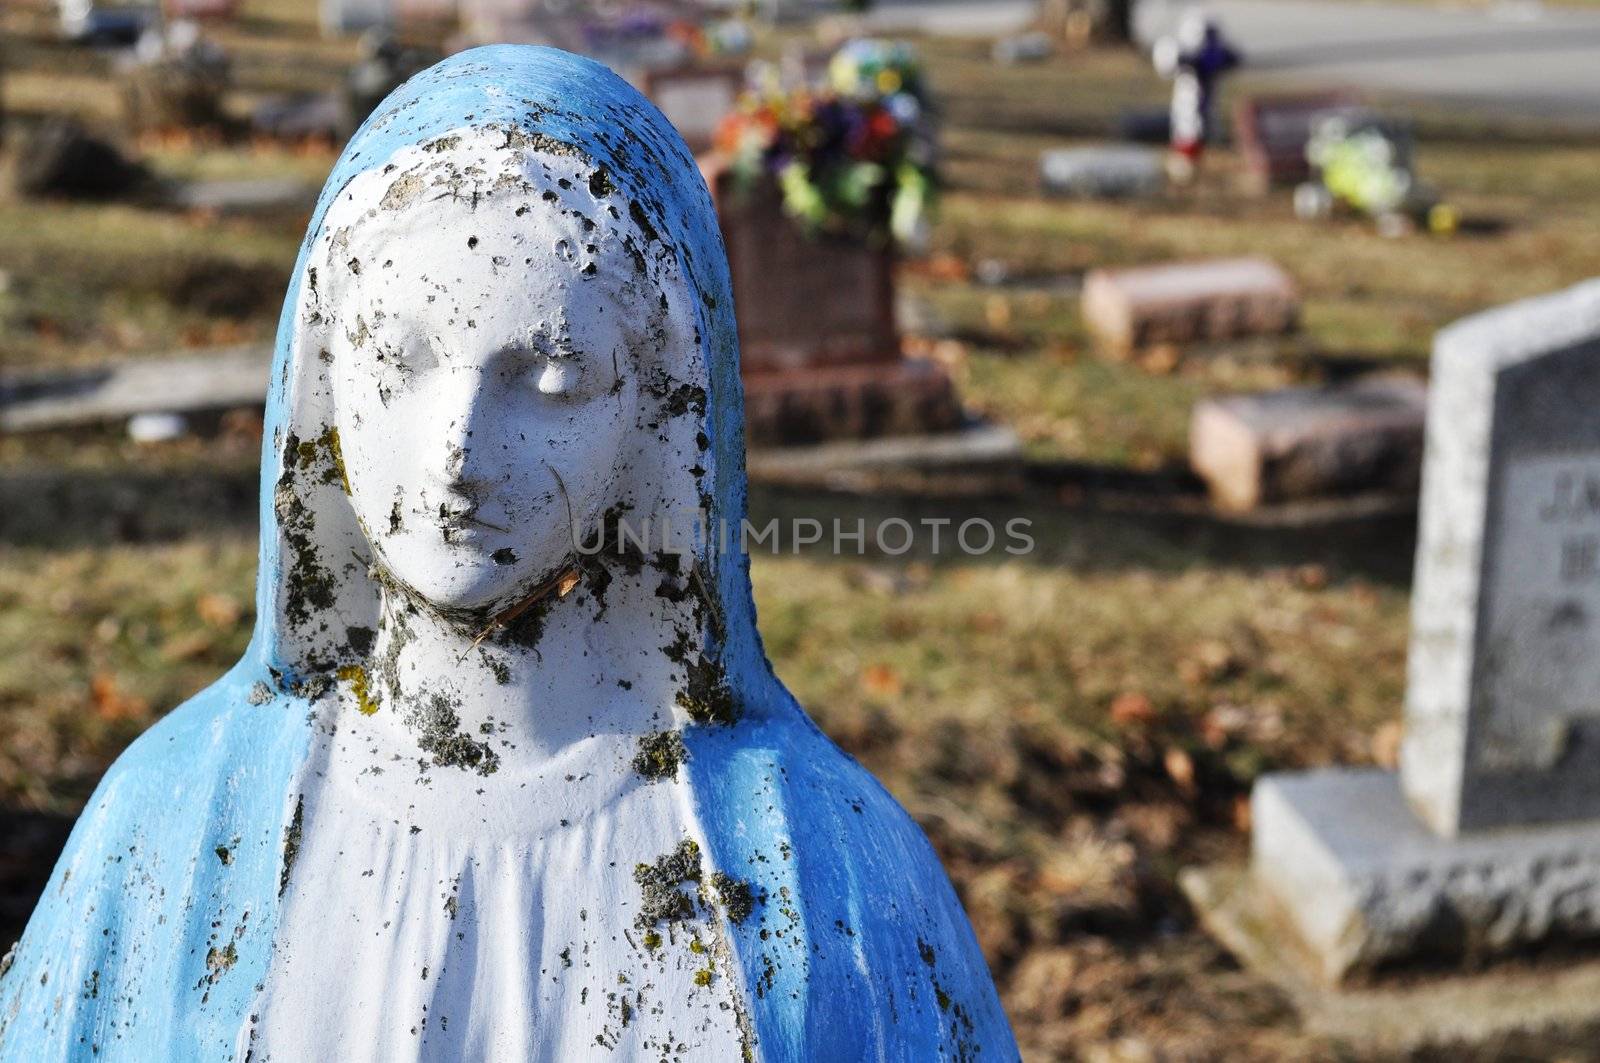 Gravesite - Mary statue - background by RefocusPhoto